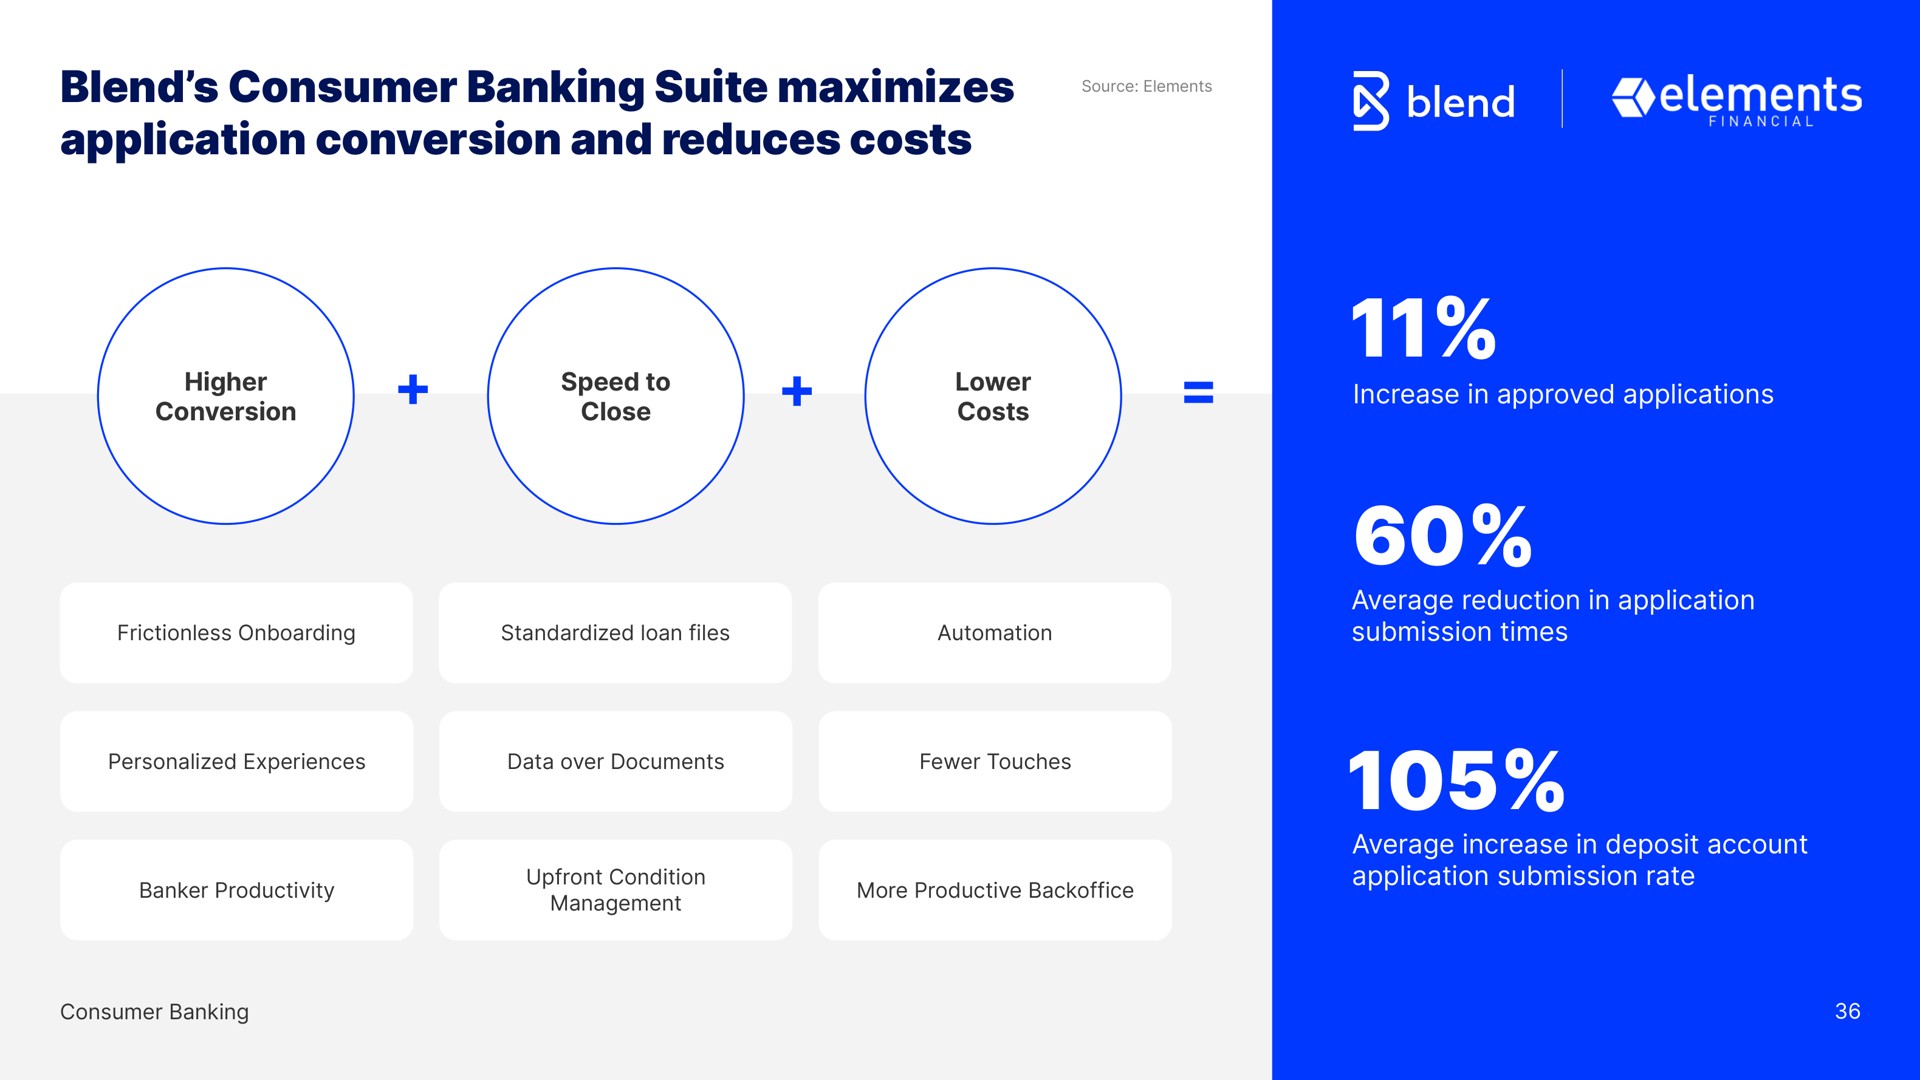 blend consumer banking suite maximizes application conversion and reduces costs elements | Blend